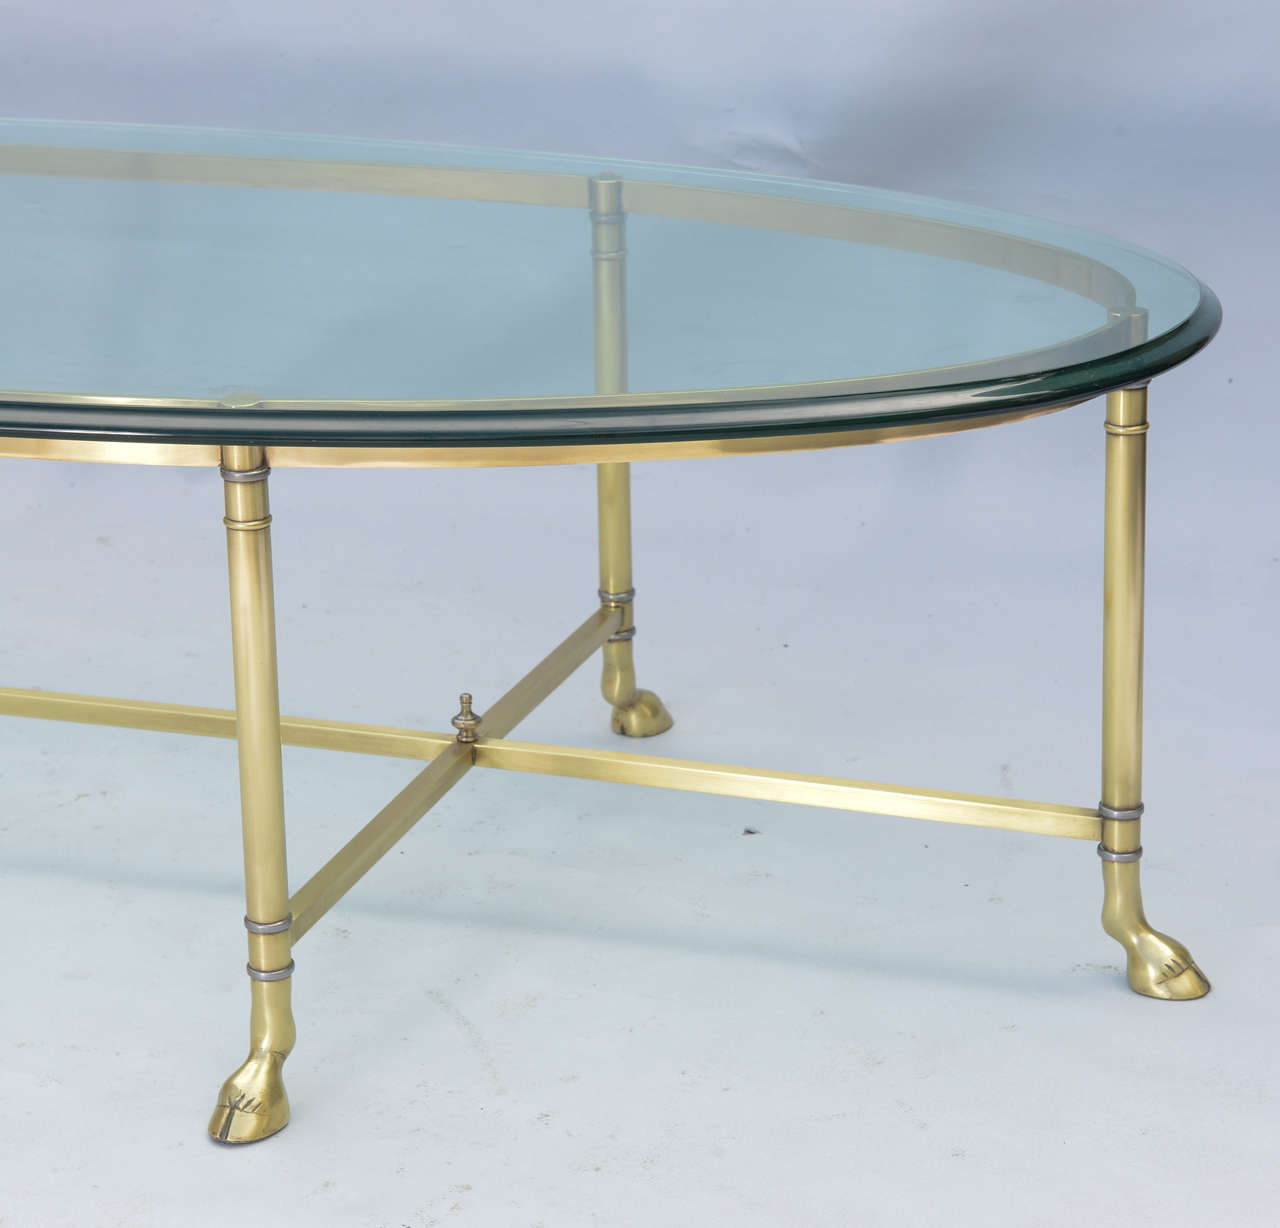 Mid-20th Century Polished Brass Cocktail Table with Oval Glass Top